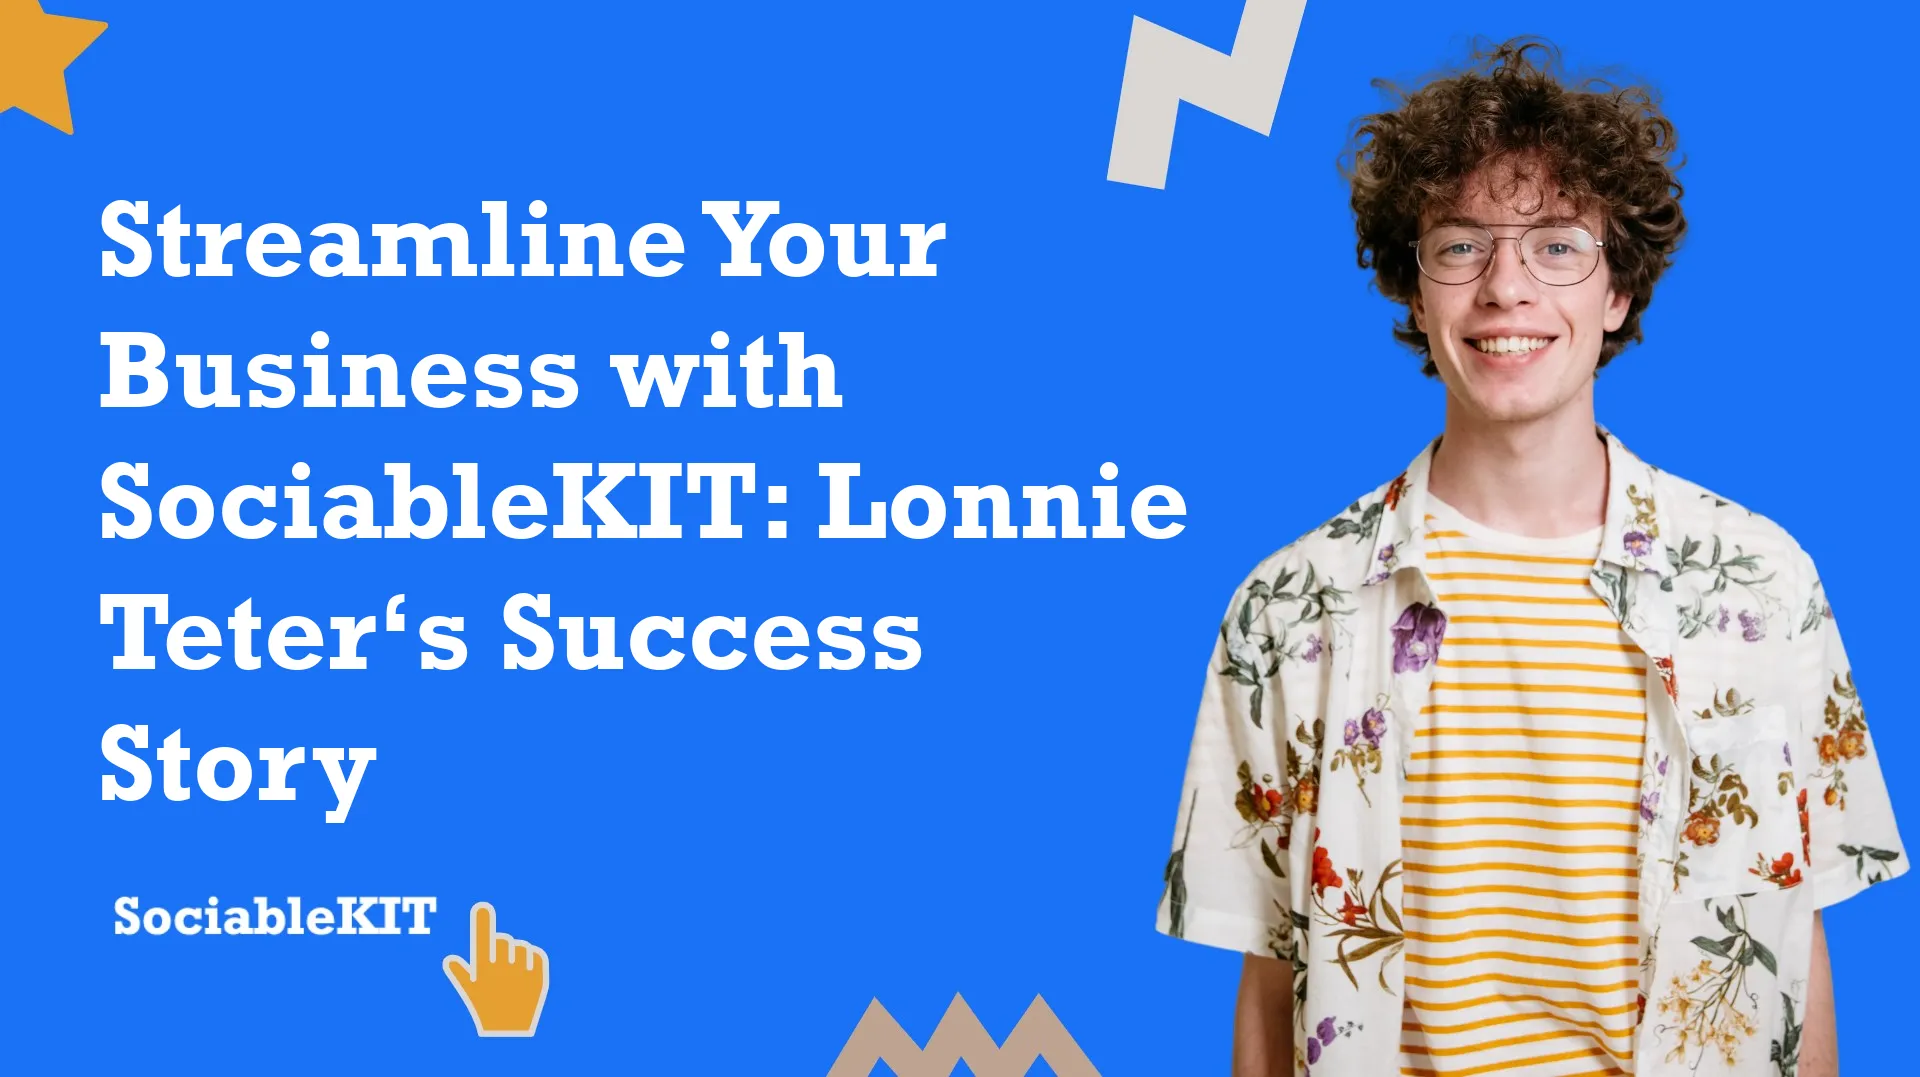 Streamline Your Business with SociableKIT: Lonnie Teter’s Success Story